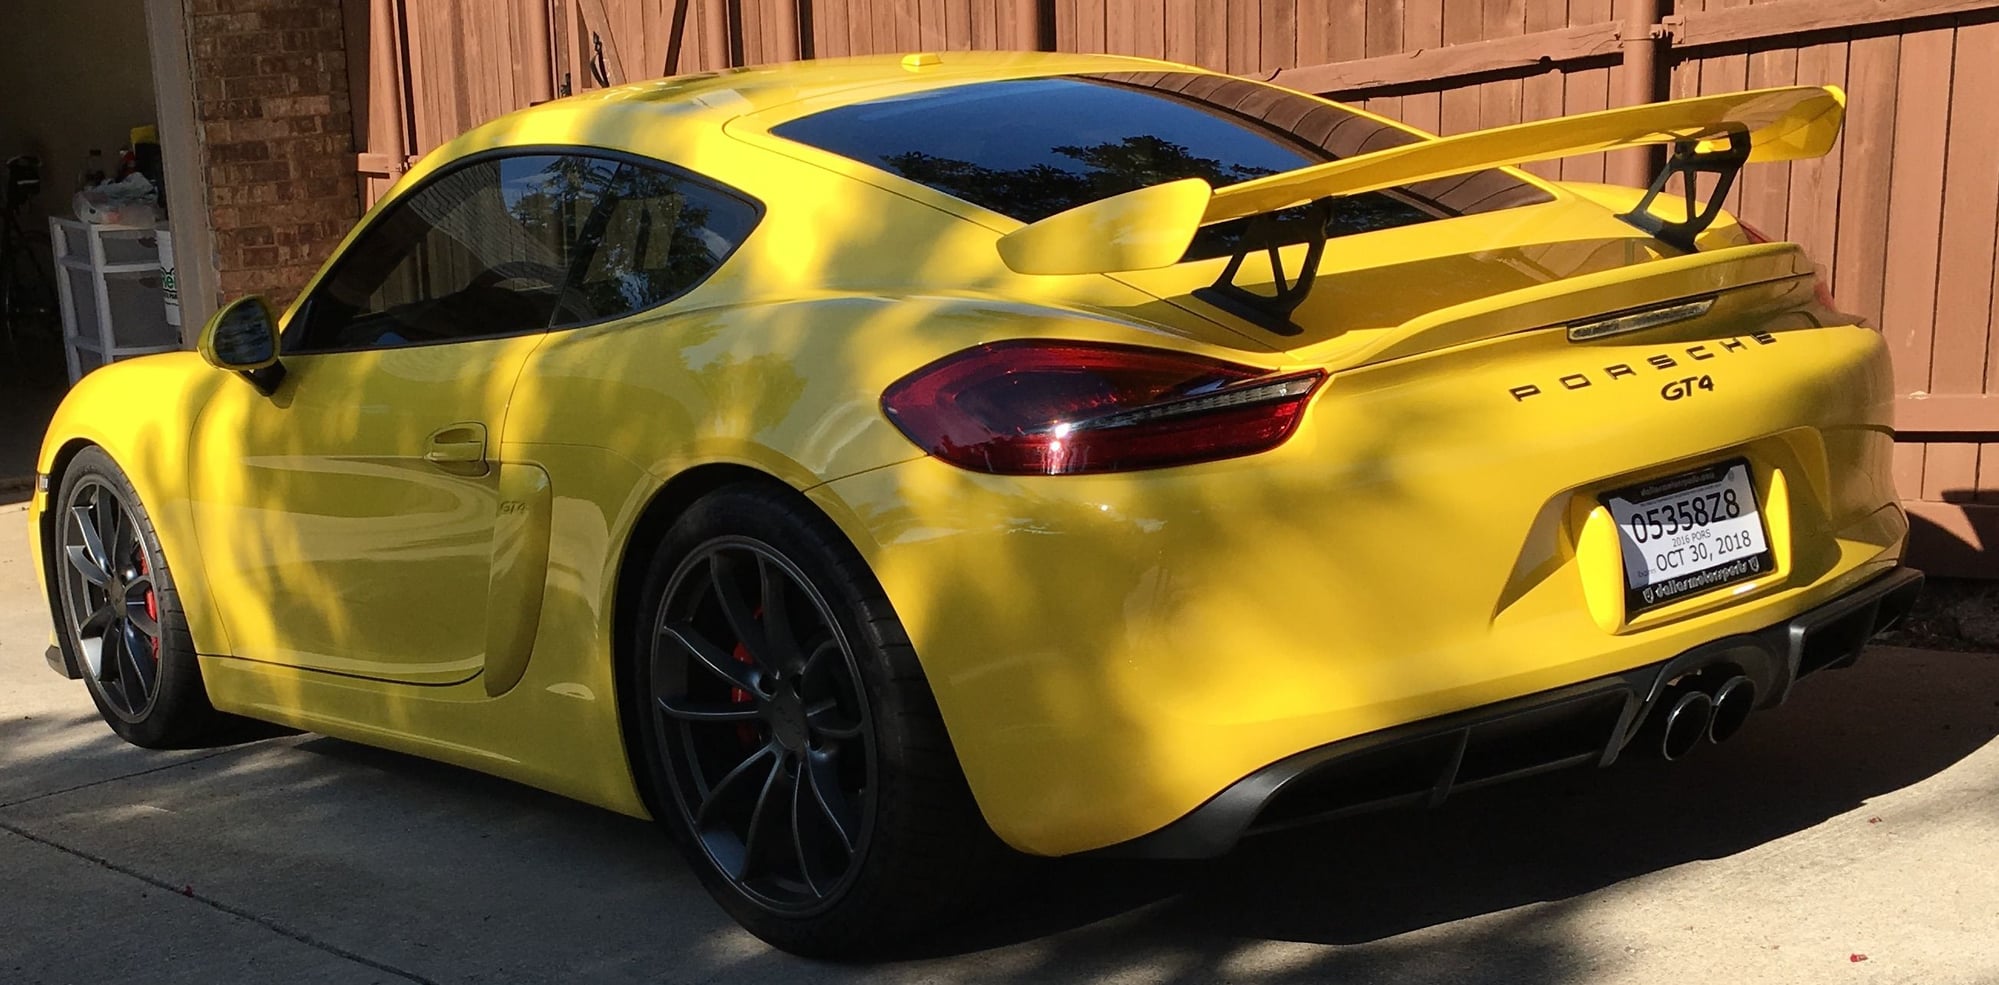 2016 Porsche Cayman GT4 - 2016 Cayman GT4, Racing Yellow, Buckets, 9,100 miles, great condition! - Used - VIN WP0AC2A85GK197886 - 9,100 Miles - 6 cyl - 2WD - Manual - Coupe - Yellow - Dallas, TX 75025, United States